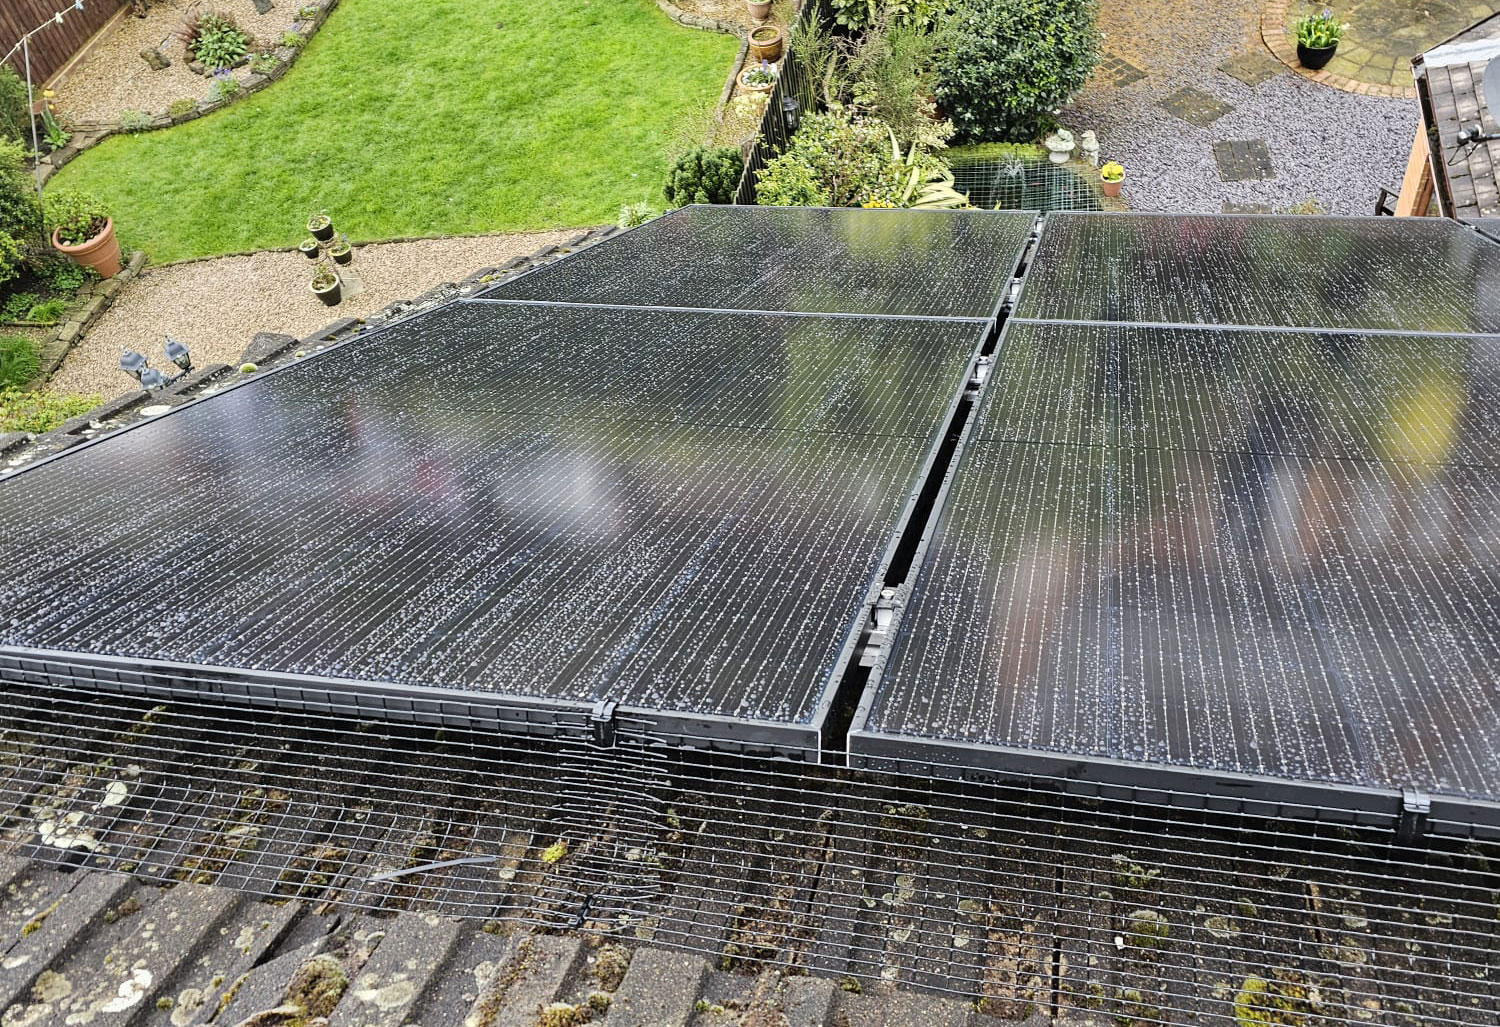 Keeping Pigeons Away From Solar Panels in Kegworth